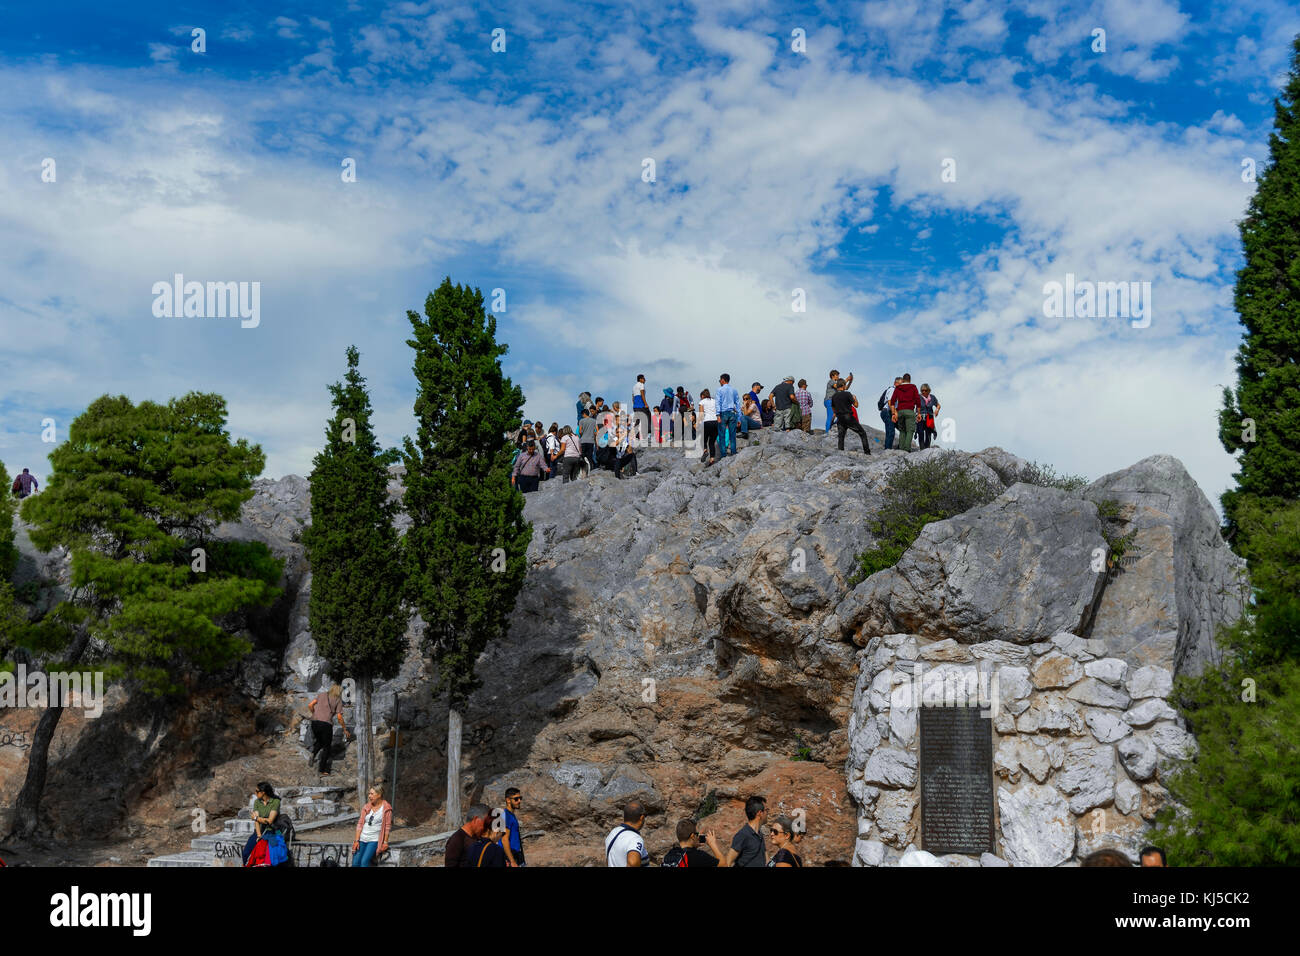 Athens, Greece Areopagus Hill - Mars Hill day view.  Ancient Greek Supreme Court rock with visitors. Stock Photo